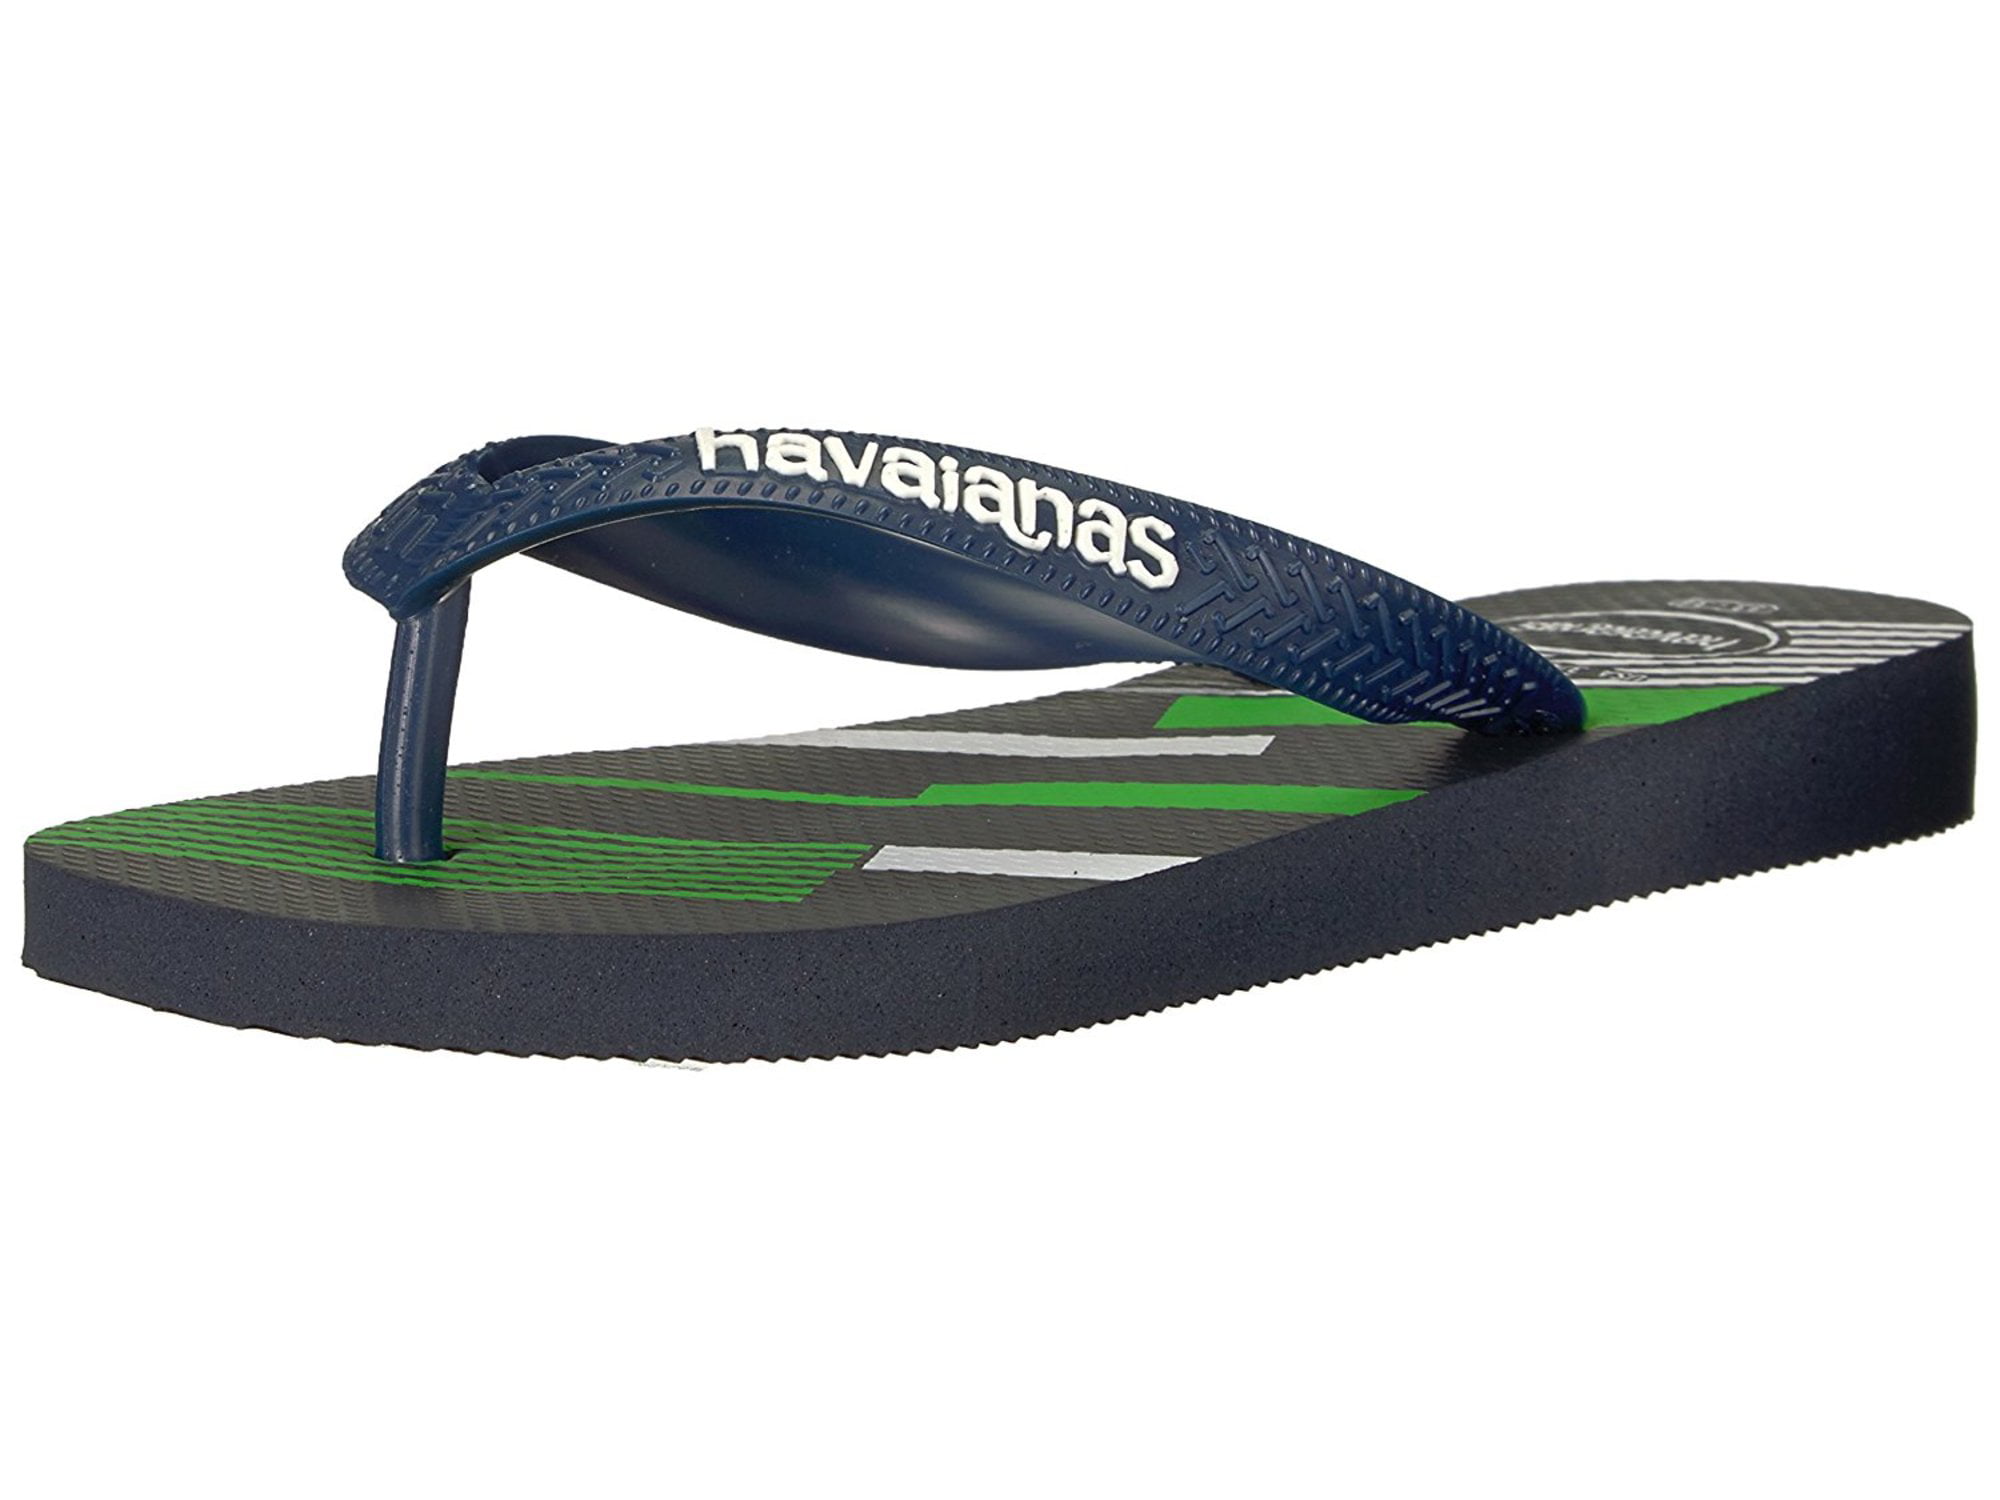 havaianas sandals made here since 1962